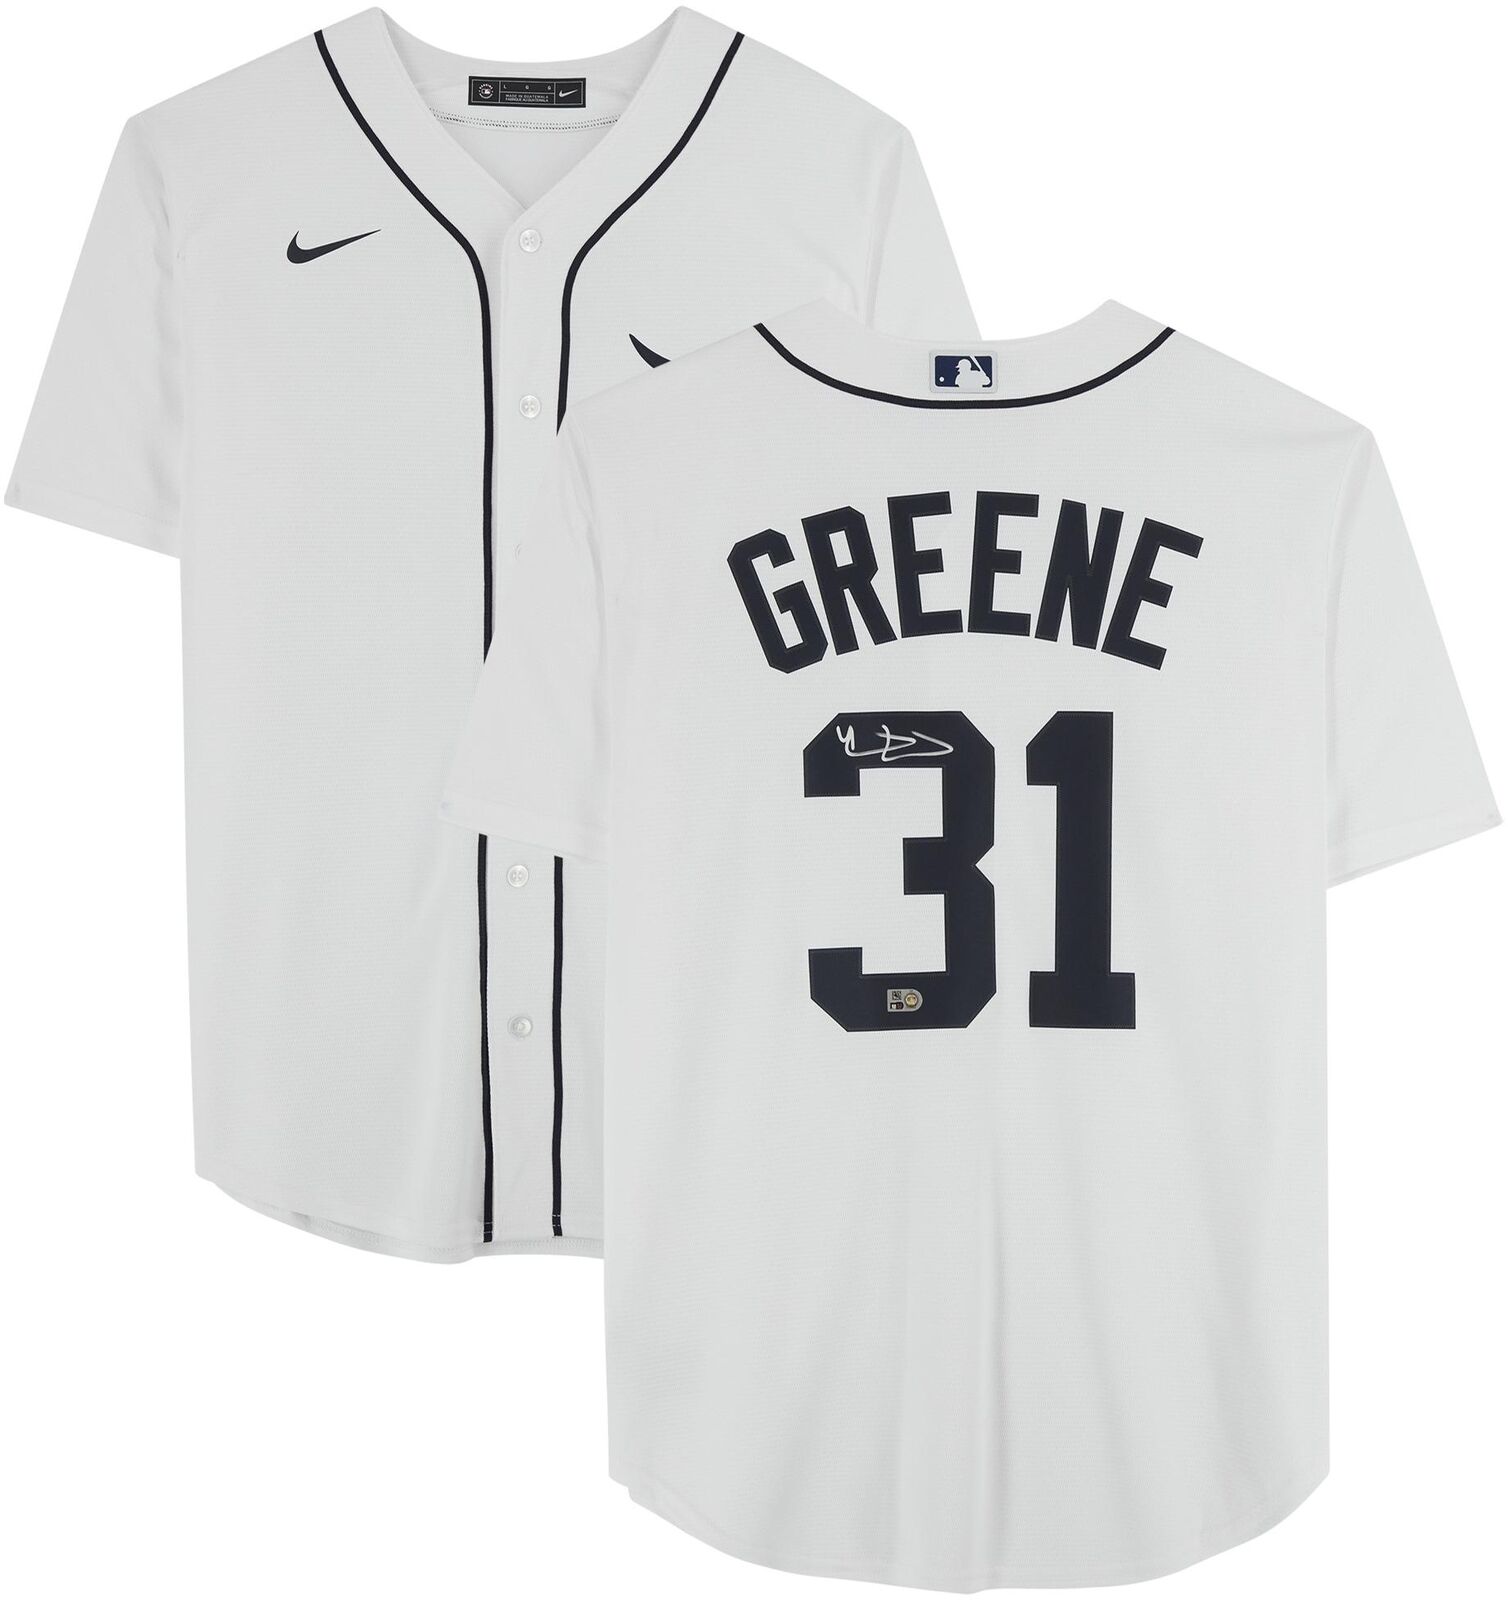 Riley Greene Detroit Tigers Autographed White Nike Replica Jersey